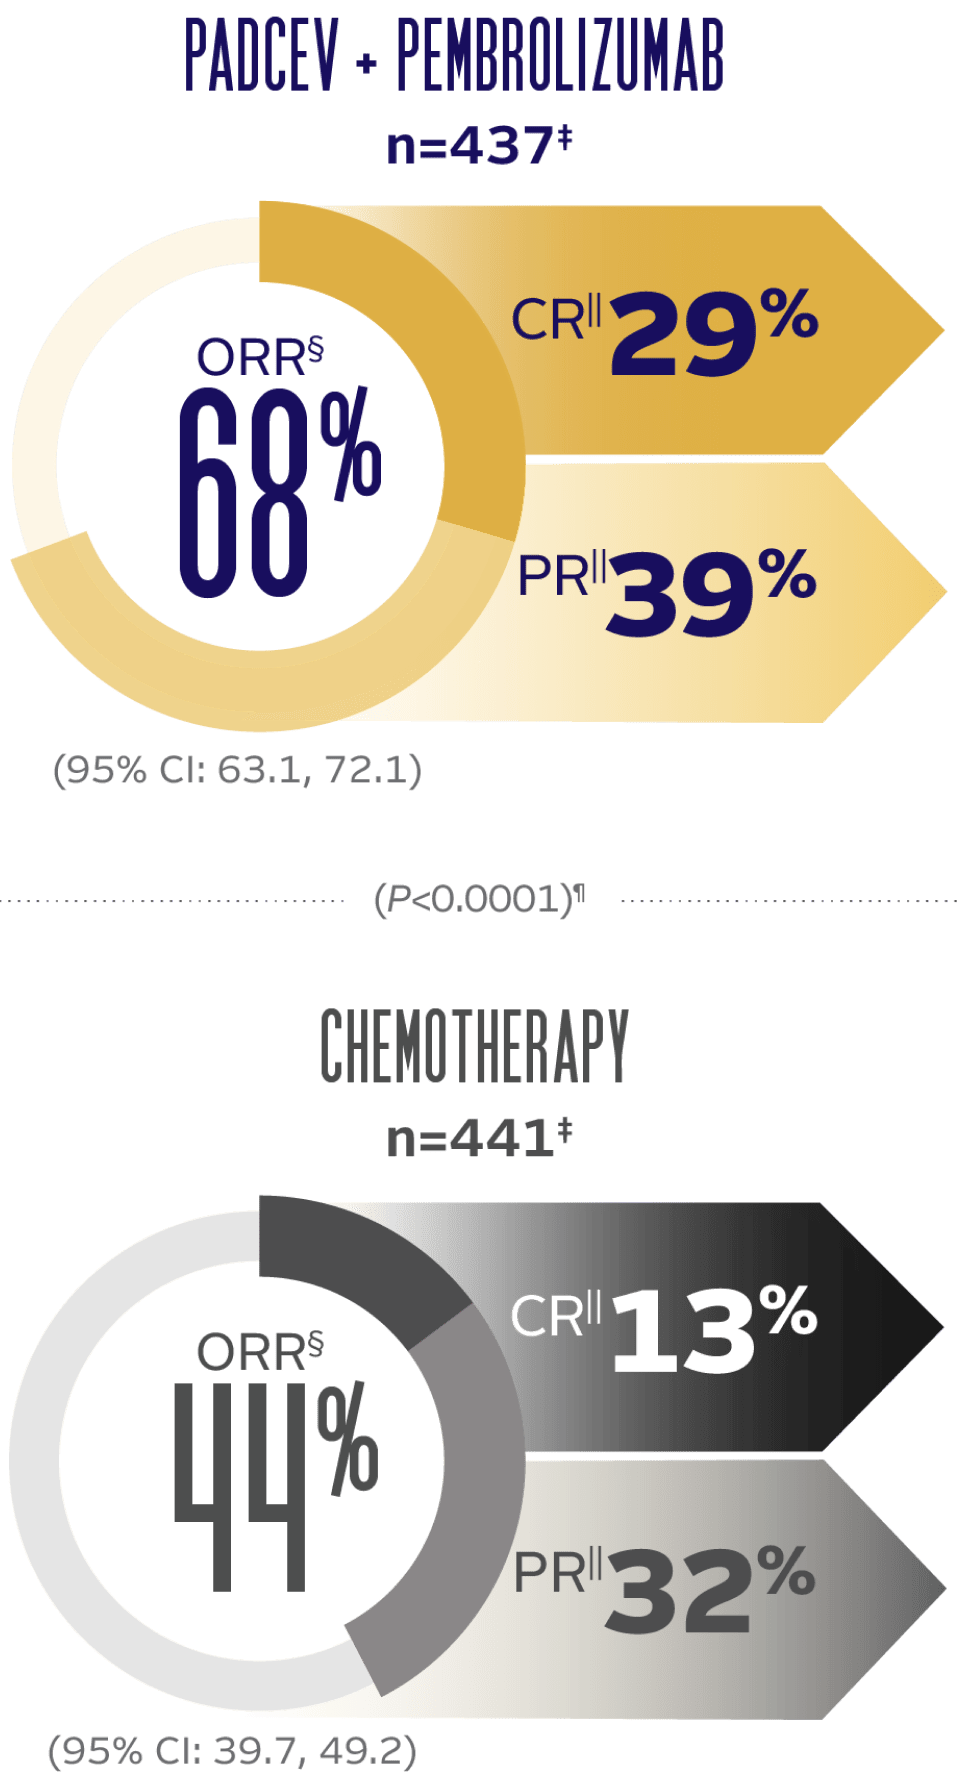 Chart showing a 68% objective response rate with PADCEV + pembrolizumab and a 44% objective response rate with chemotherapy.